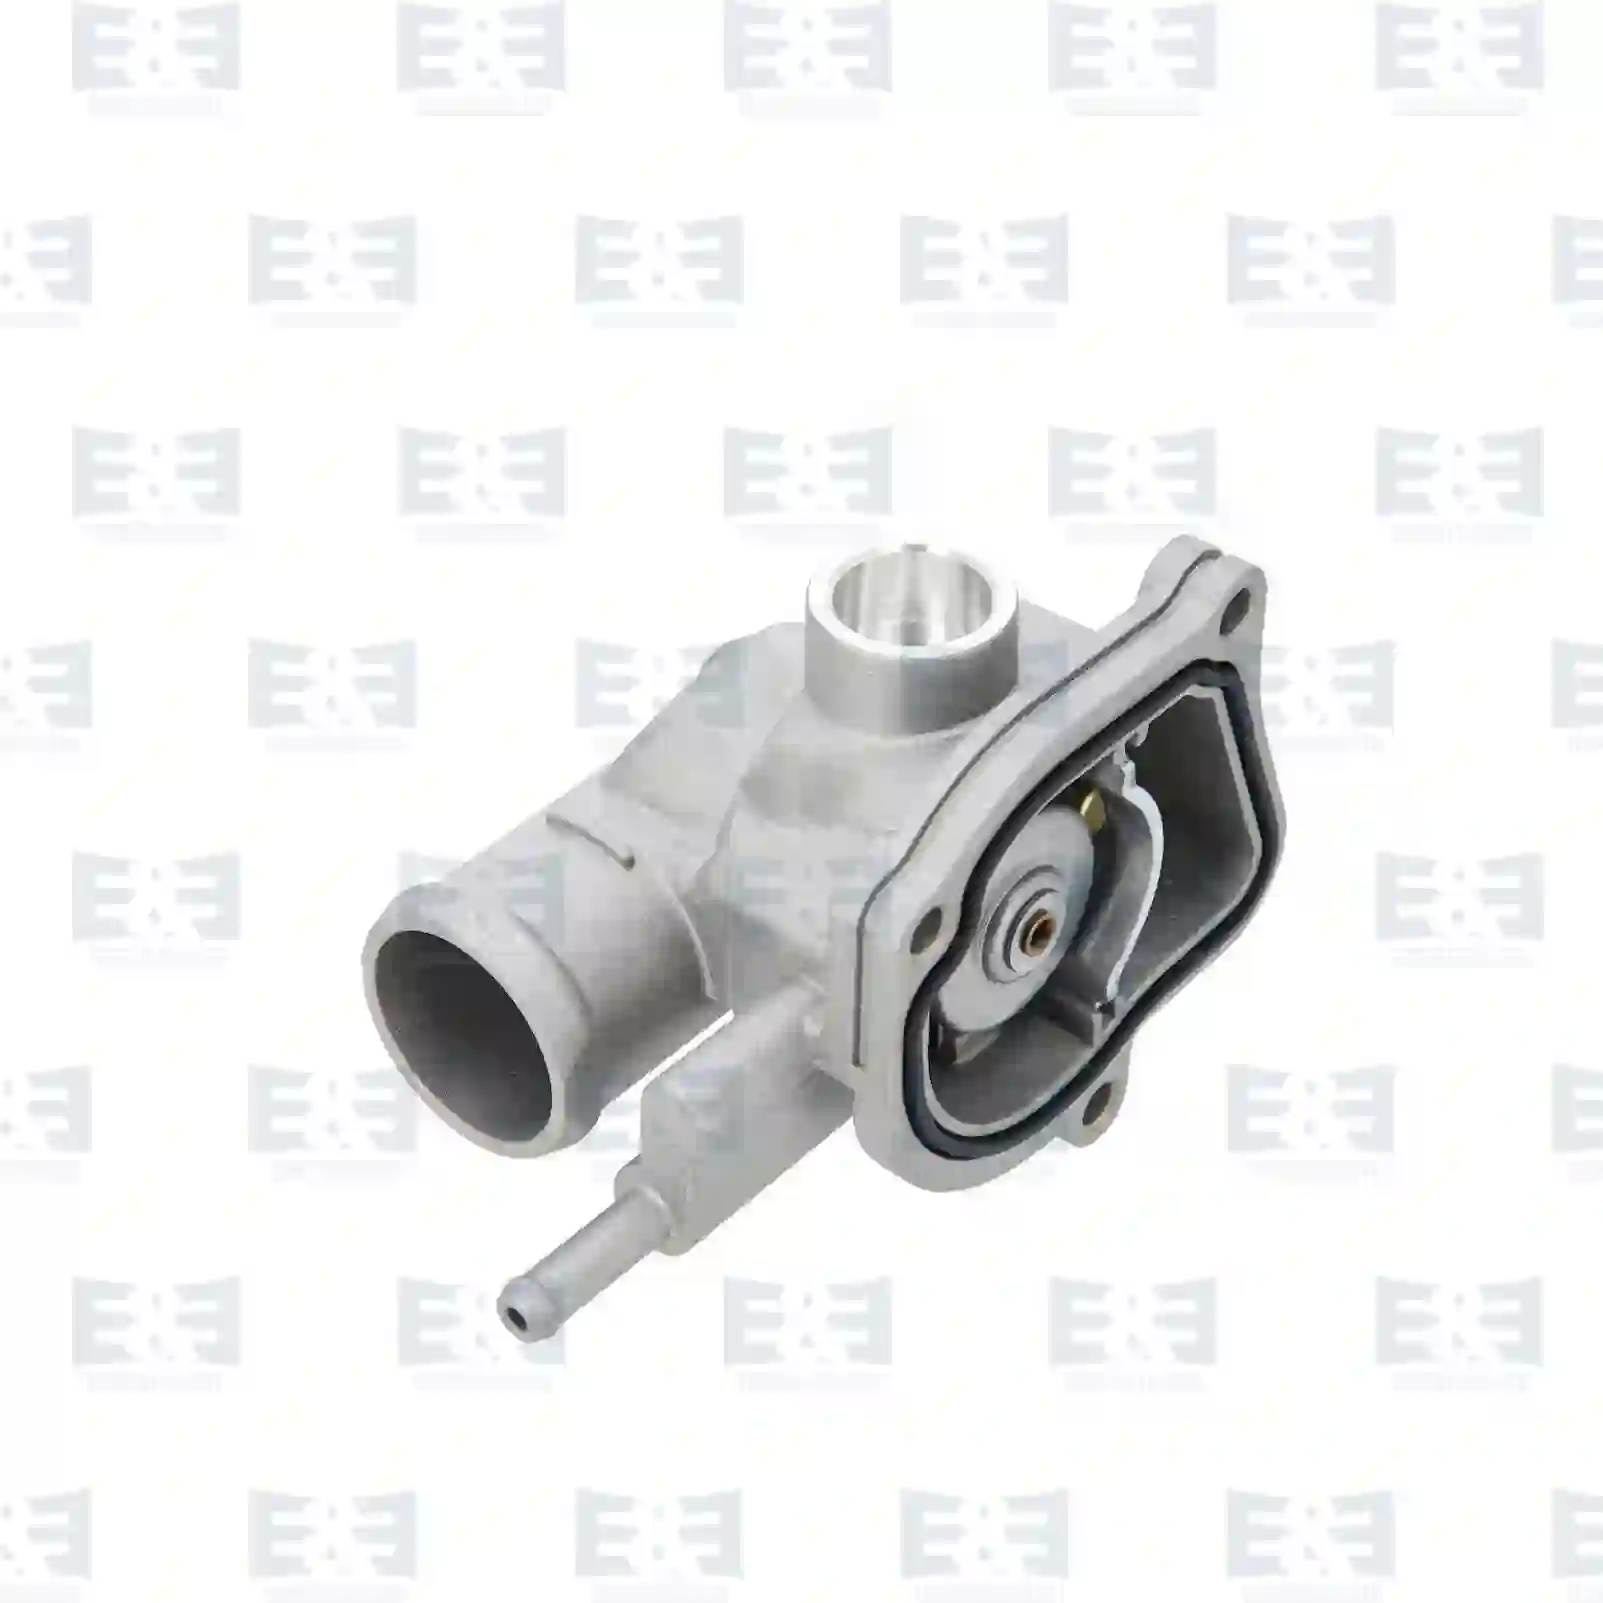 Thermostat Thermostat, EE No 2E2203719 ,  oem no:4792237AB, 5080146AA, 5080146AB, 5080146AB, 68237102AA, 5080146AA, 5080146AB, 0052036275, 6112000215, 6112000715, 6112030475, 6112030575, 6112031575, 6112031975, 6462001215, ZG00671-0008 E&E Truck Spare Parts | Truck Spare Parts, Auotomotive Spare Parts